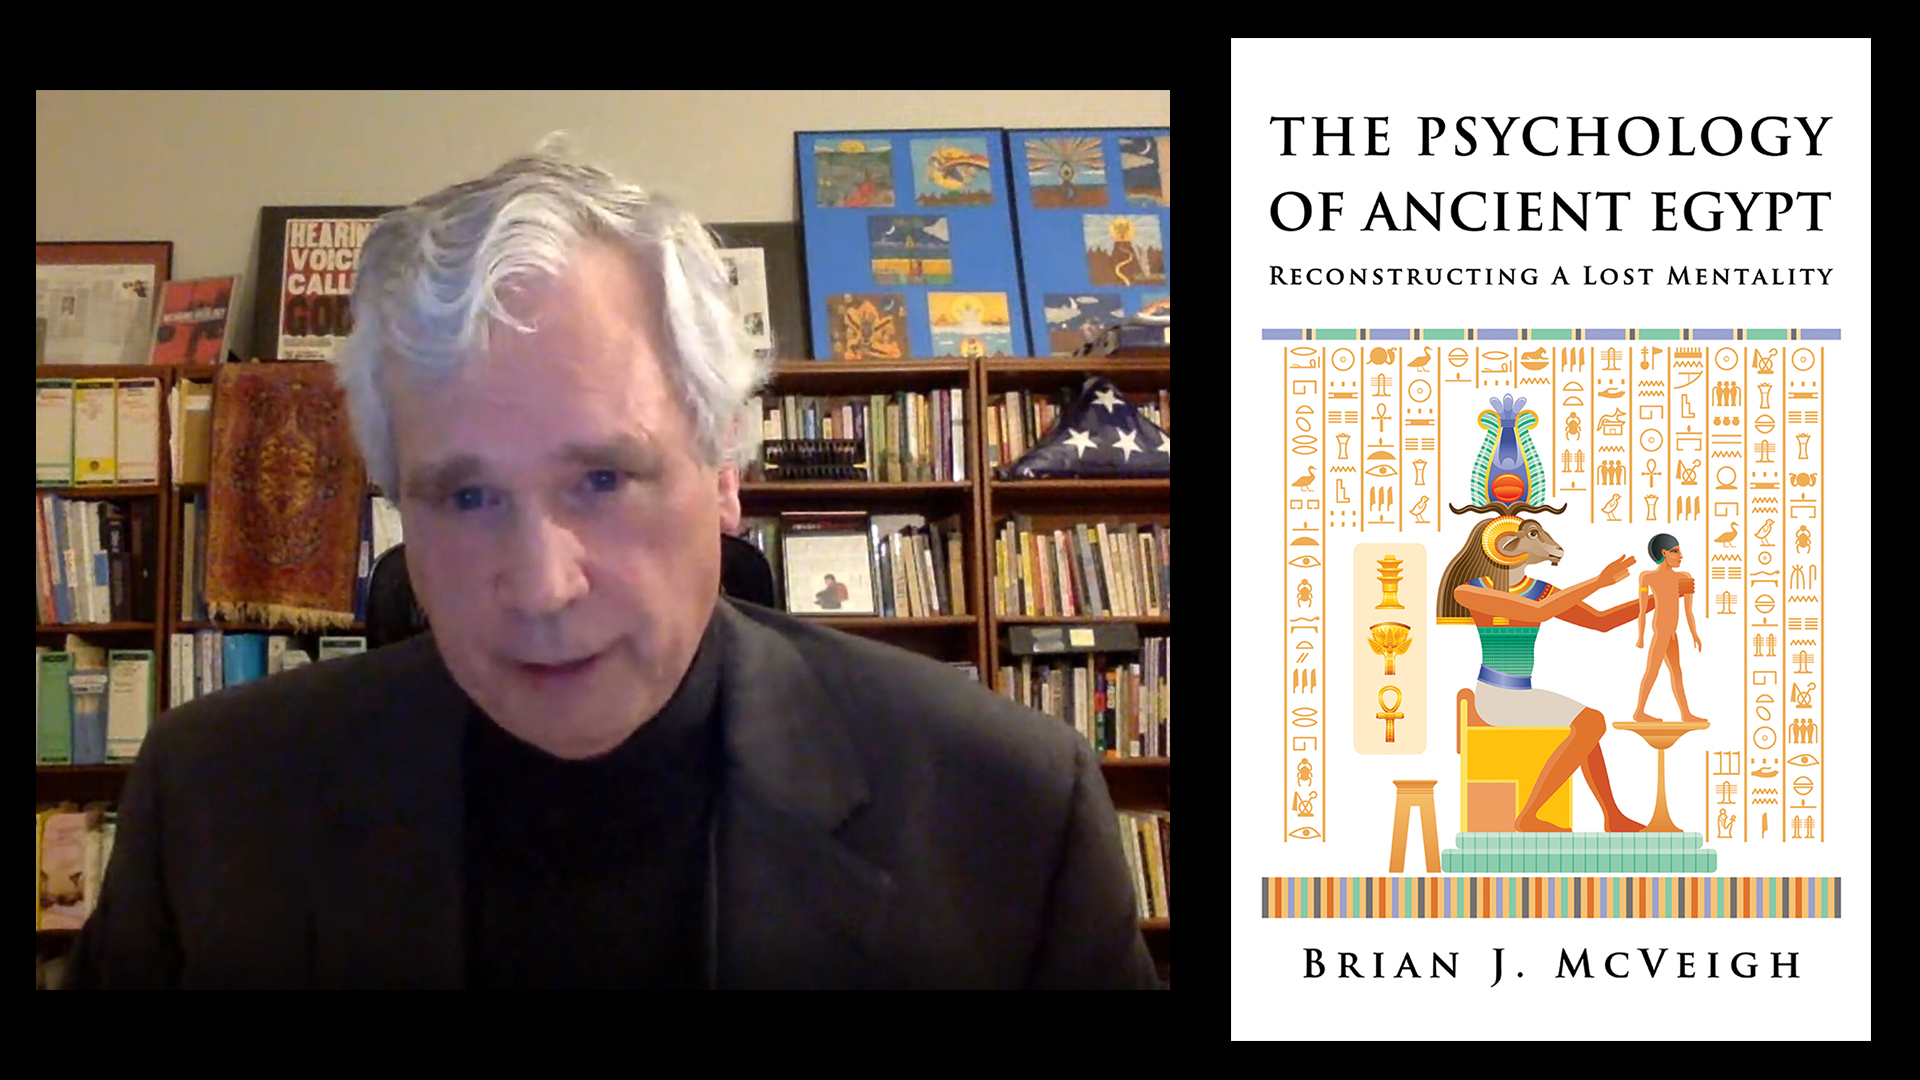 Brian J. McVeigh - The Psychology of Ancient Egypt